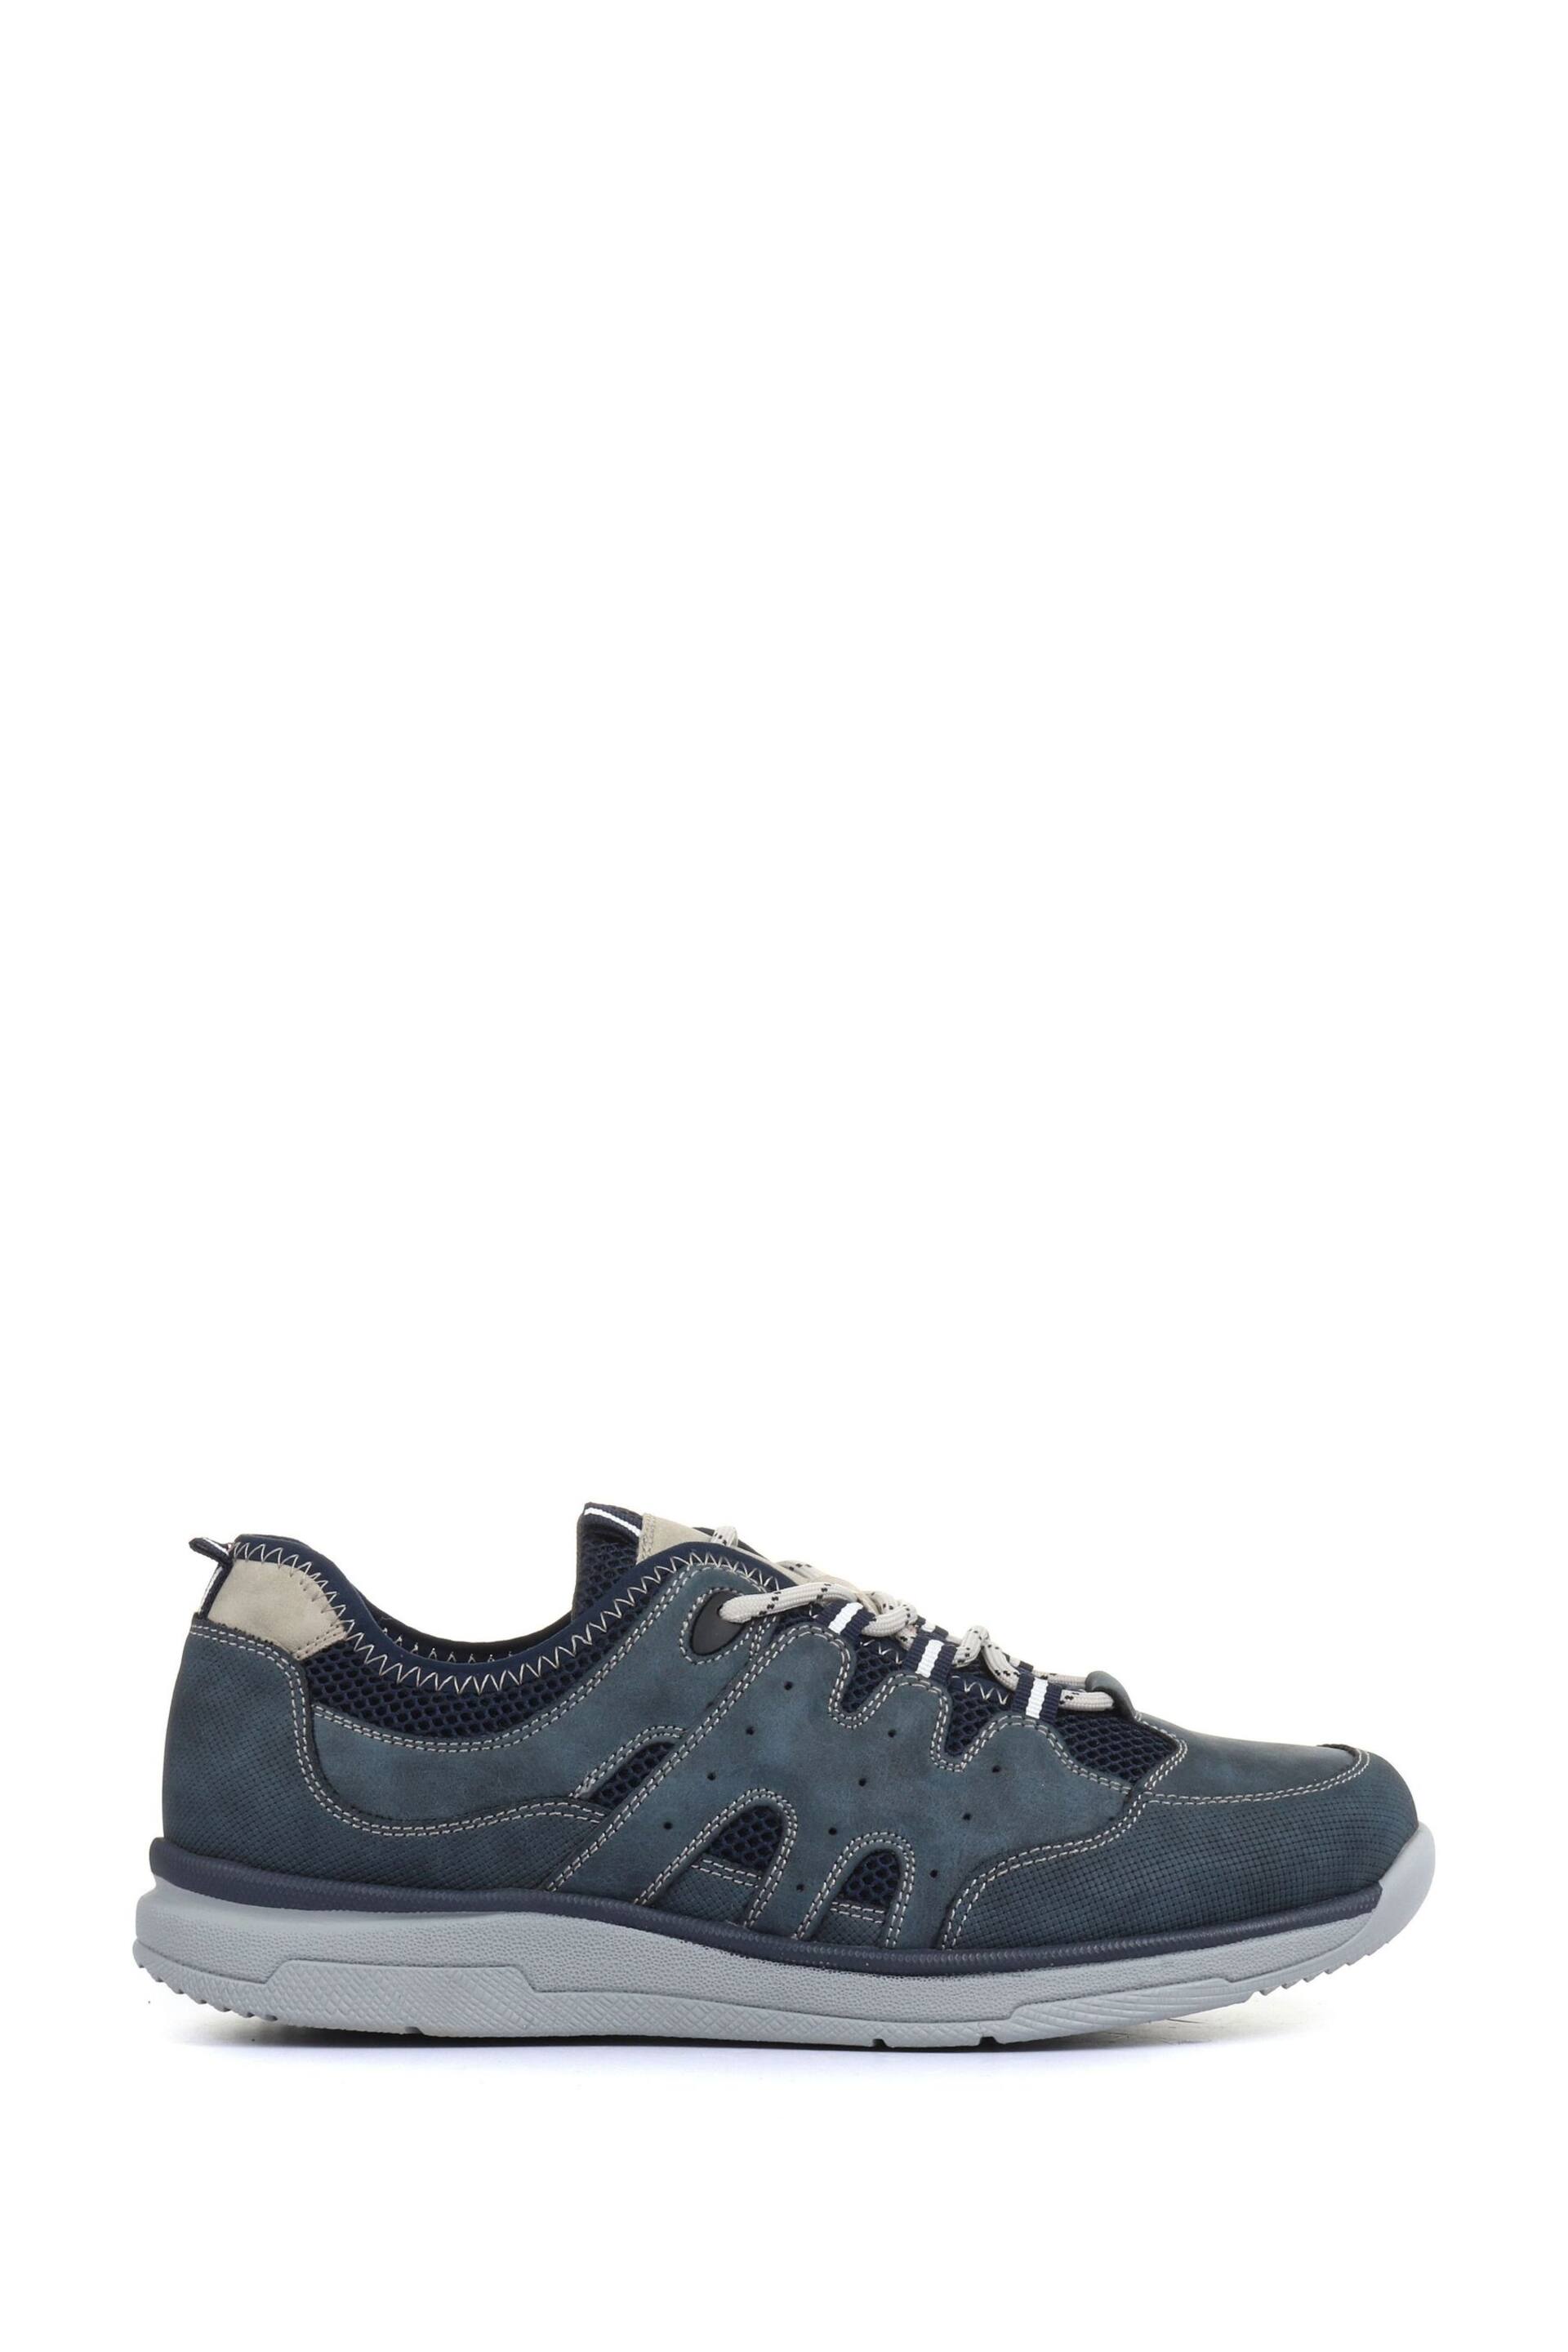 Pavers Blue Mens Wide Fit Lace-Up Trainers - Image 1 of 5